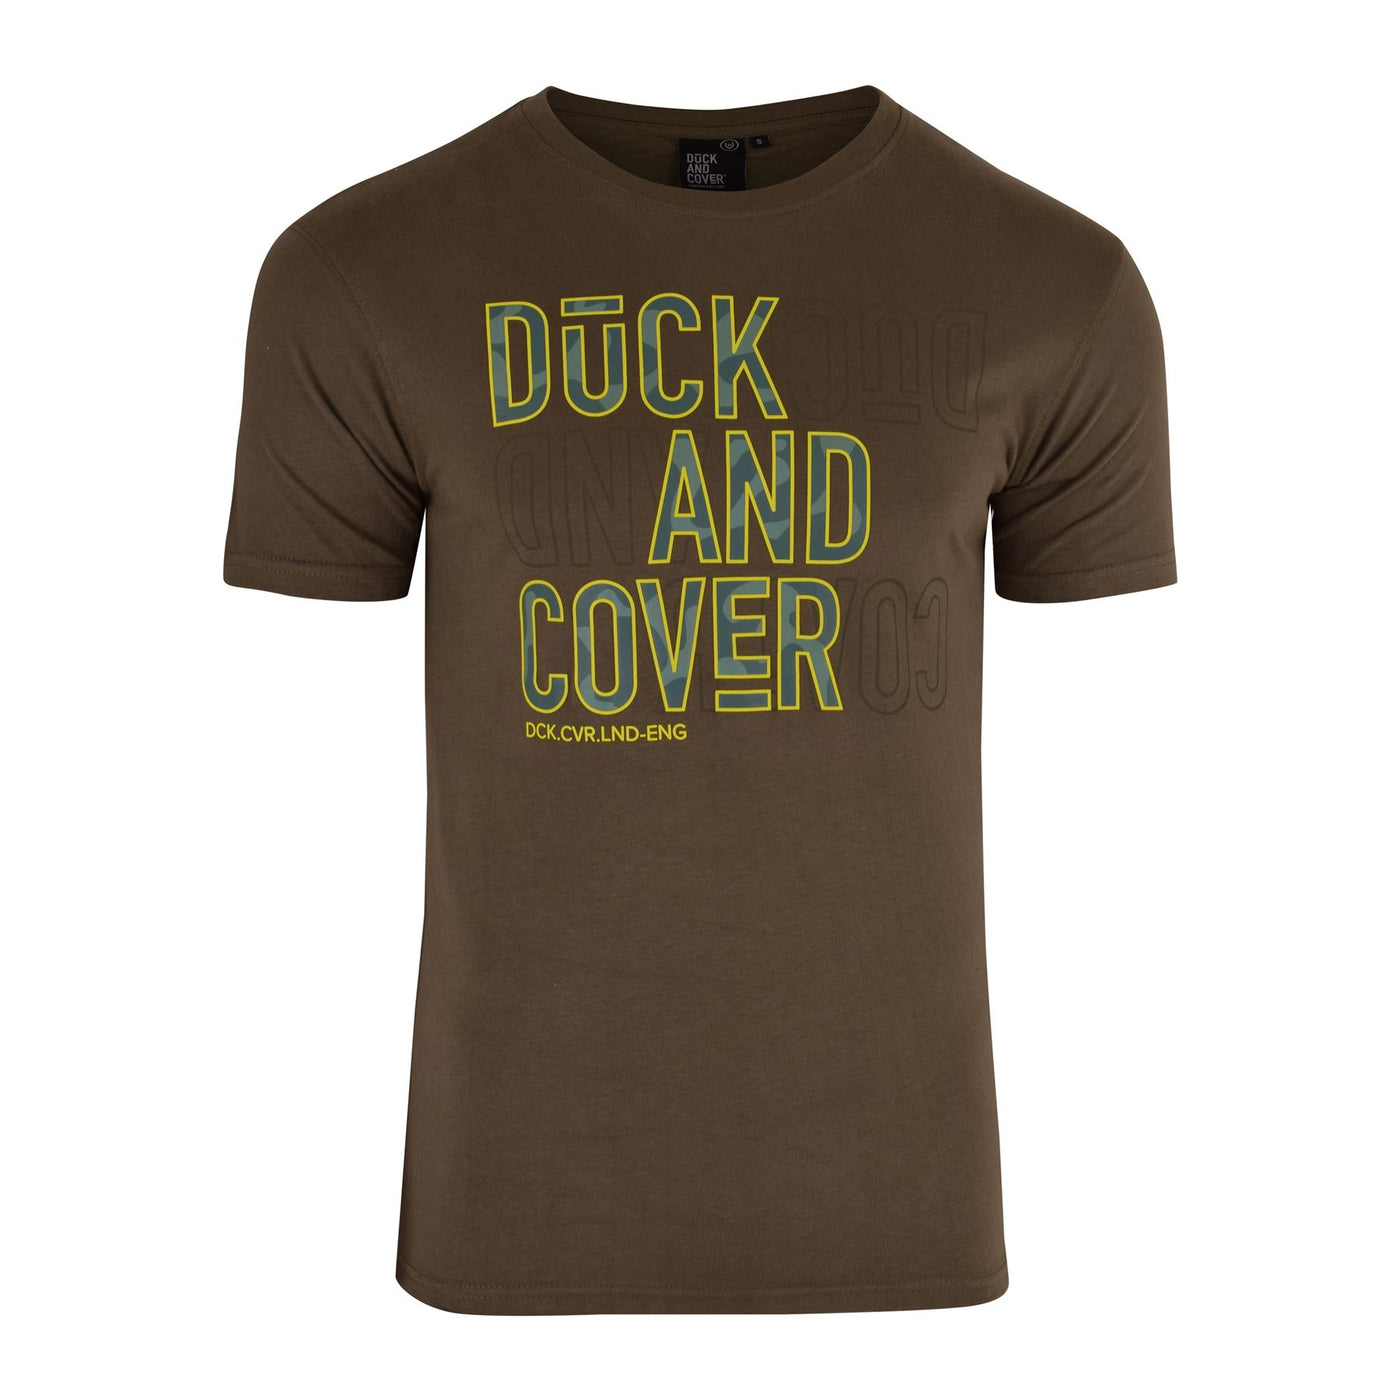 Duck and Cover Mens Camo Branded Crew Neck Short Sleeve T-Shirt Cotton Tee Top